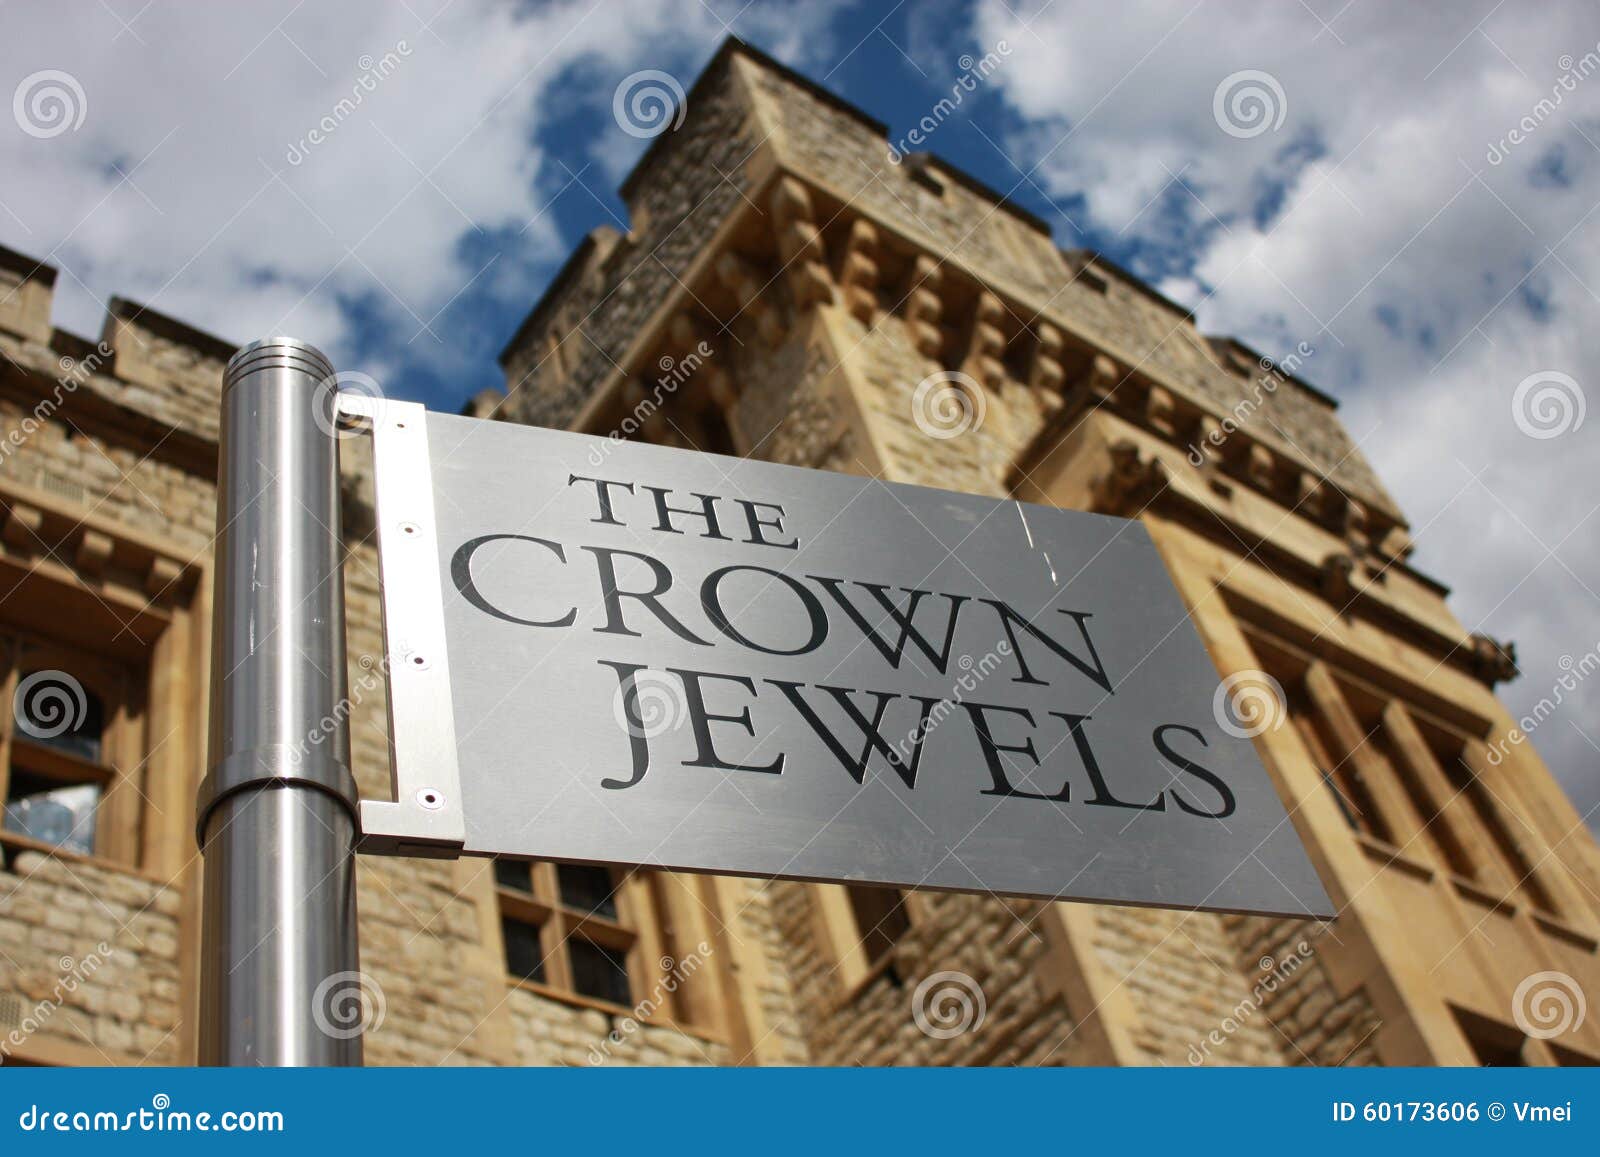 the crown jewels of london